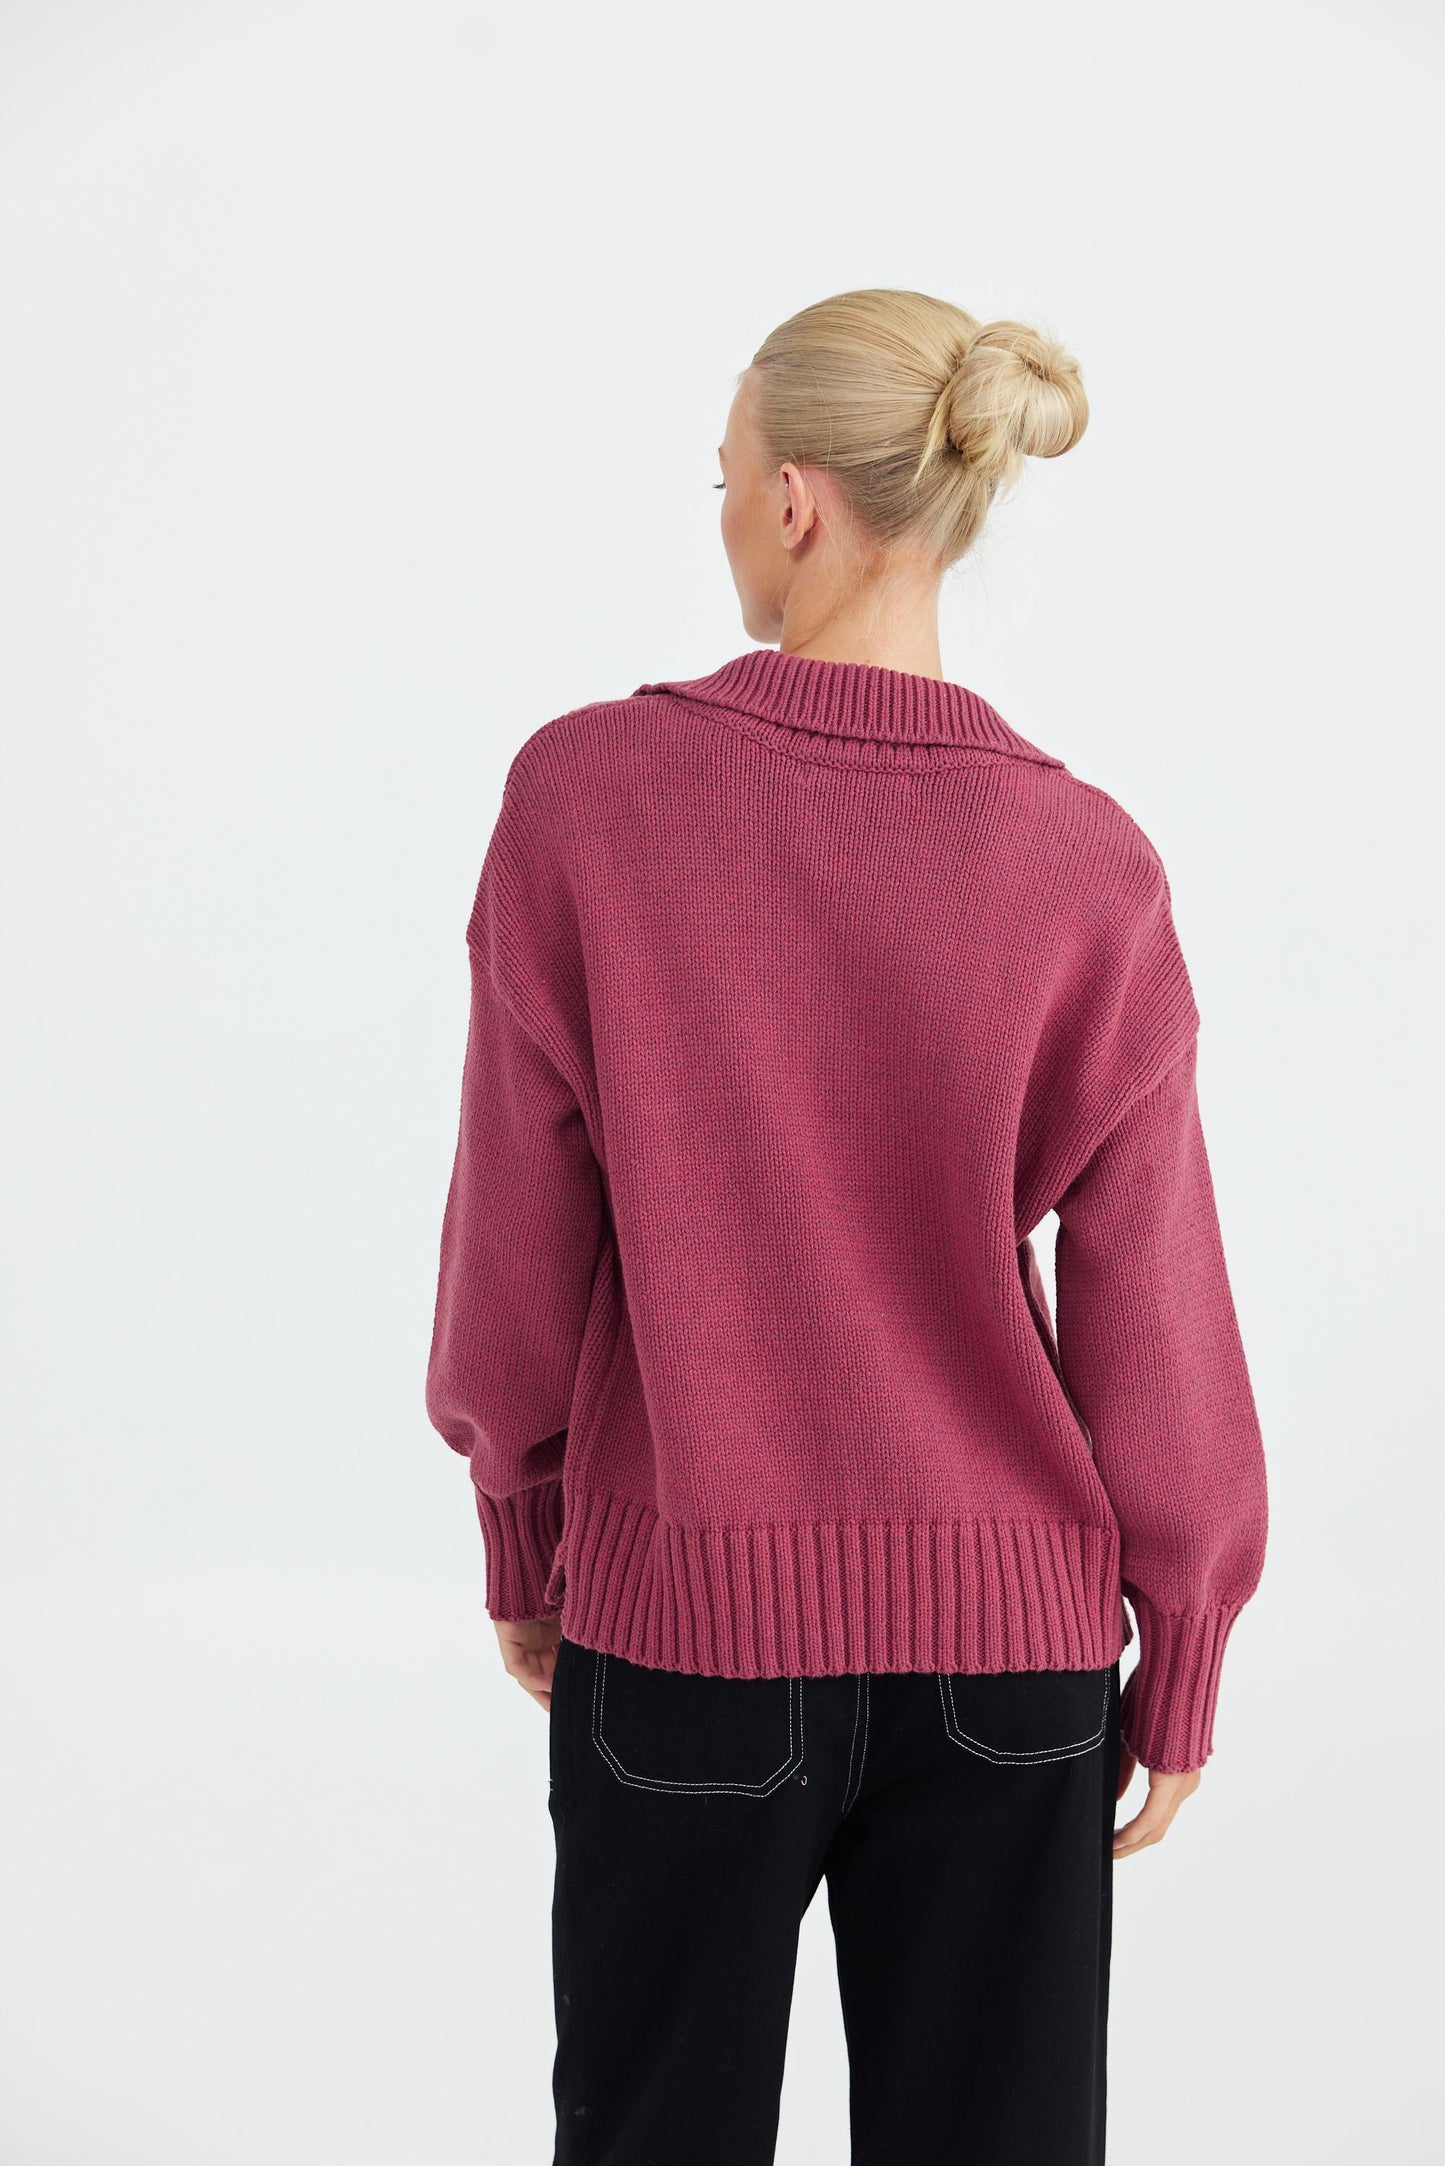 Daisy Says Goldie Sweater - Mulberry